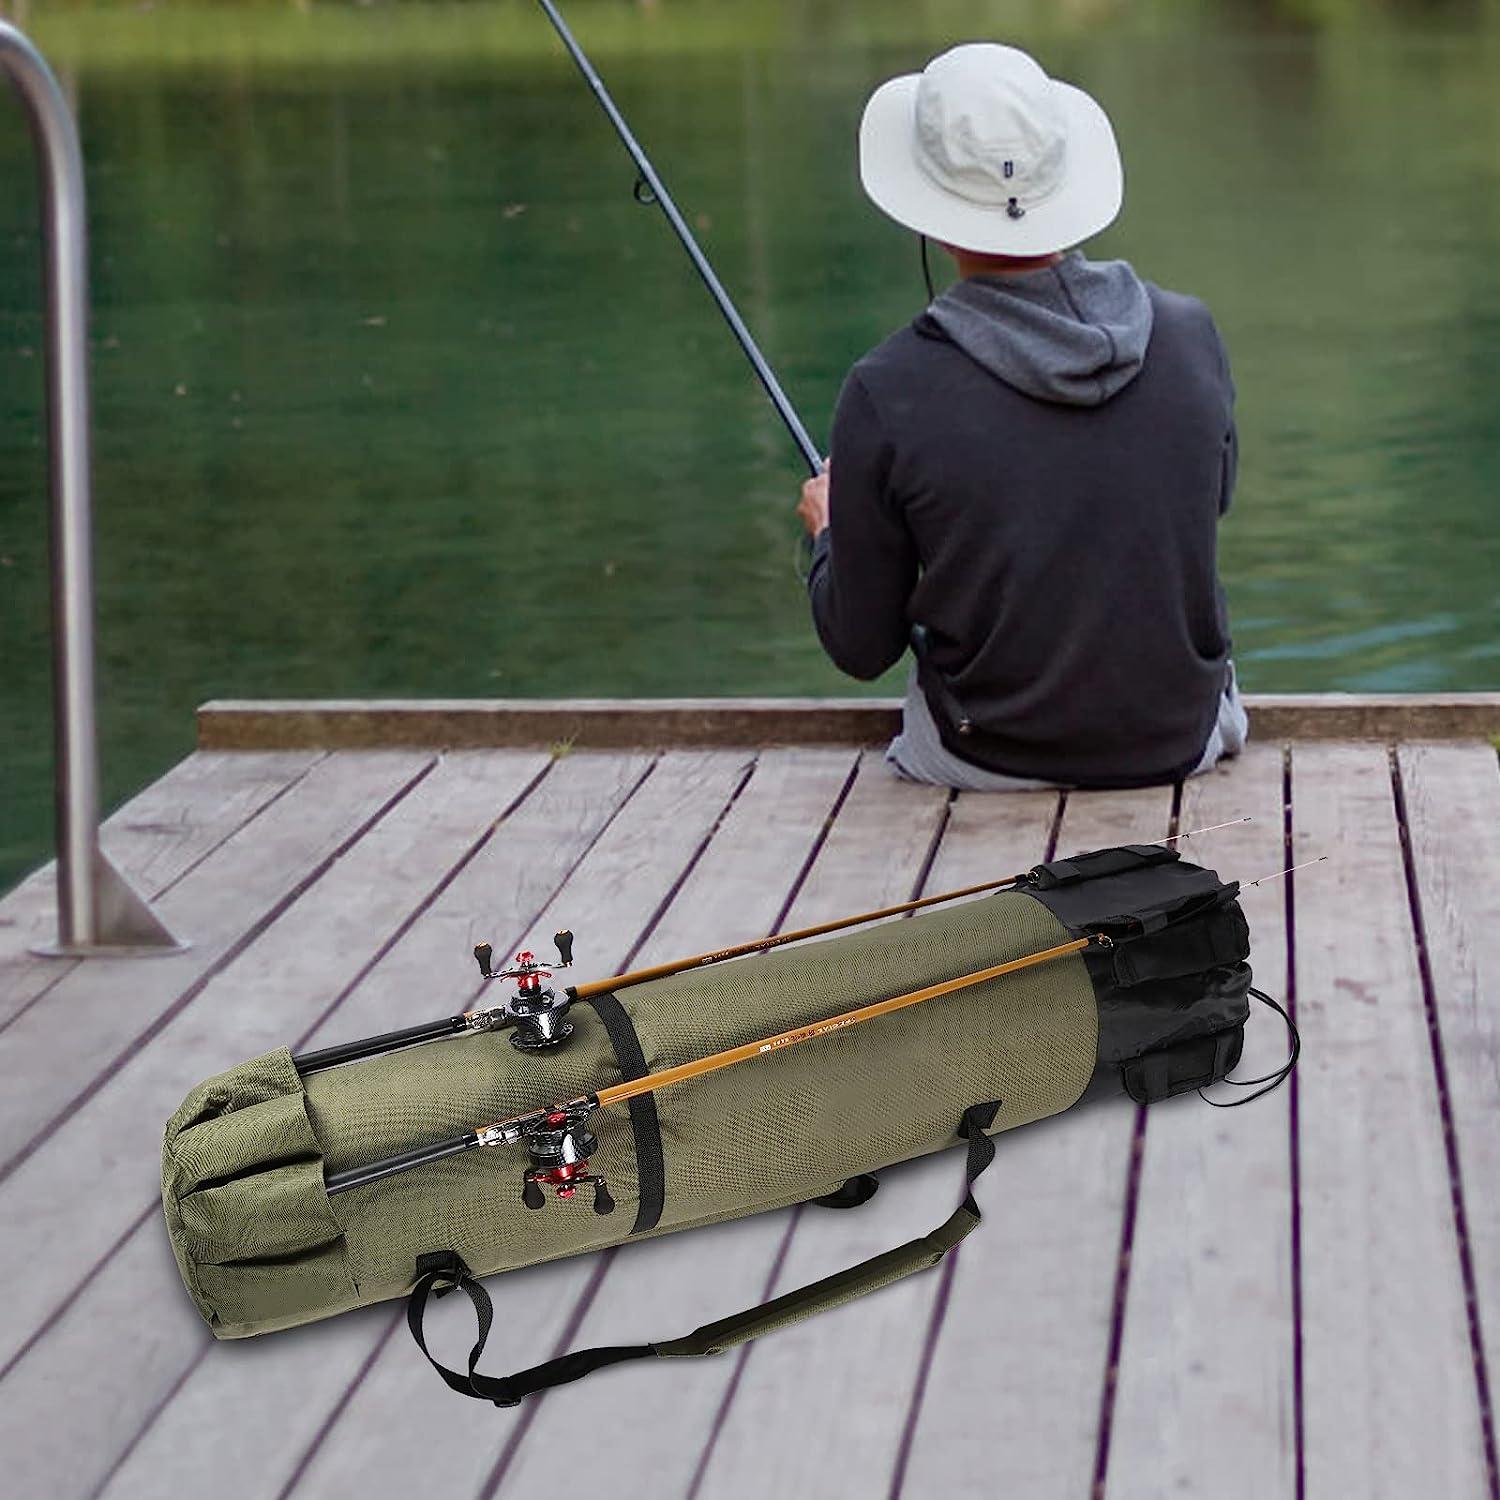 Wowelife Fishing Rod Carrier Fishing Reel Organizer Pole Storage Bag for  Fishing and Traveling,A Gift for Family Father, Daughter and Friends Green